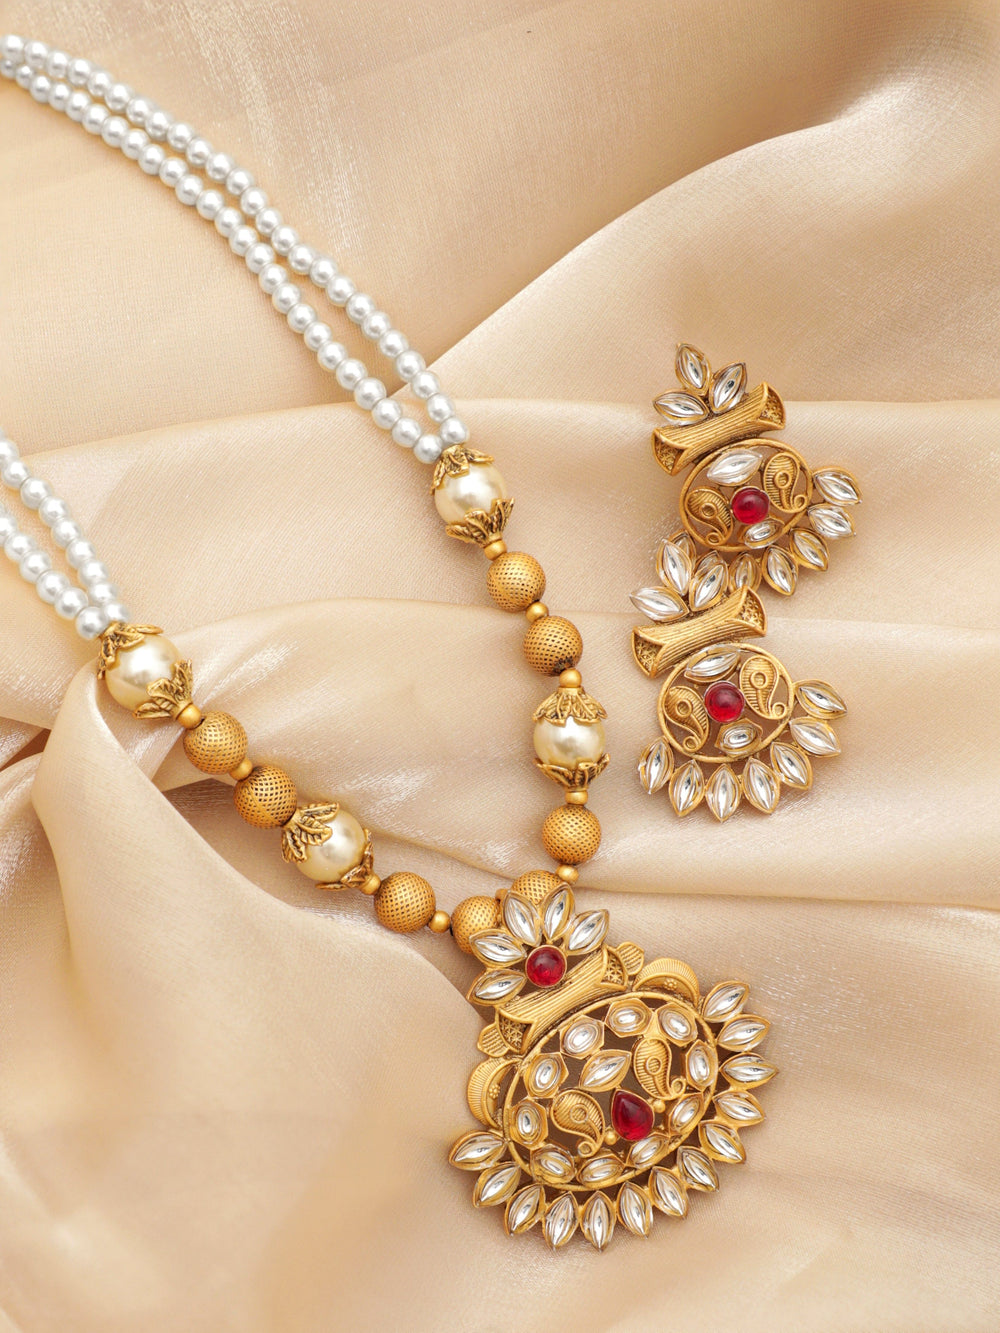 Gold-Colored Pendant Necklace Set with White Beads and Small Stones Jewellery Sets